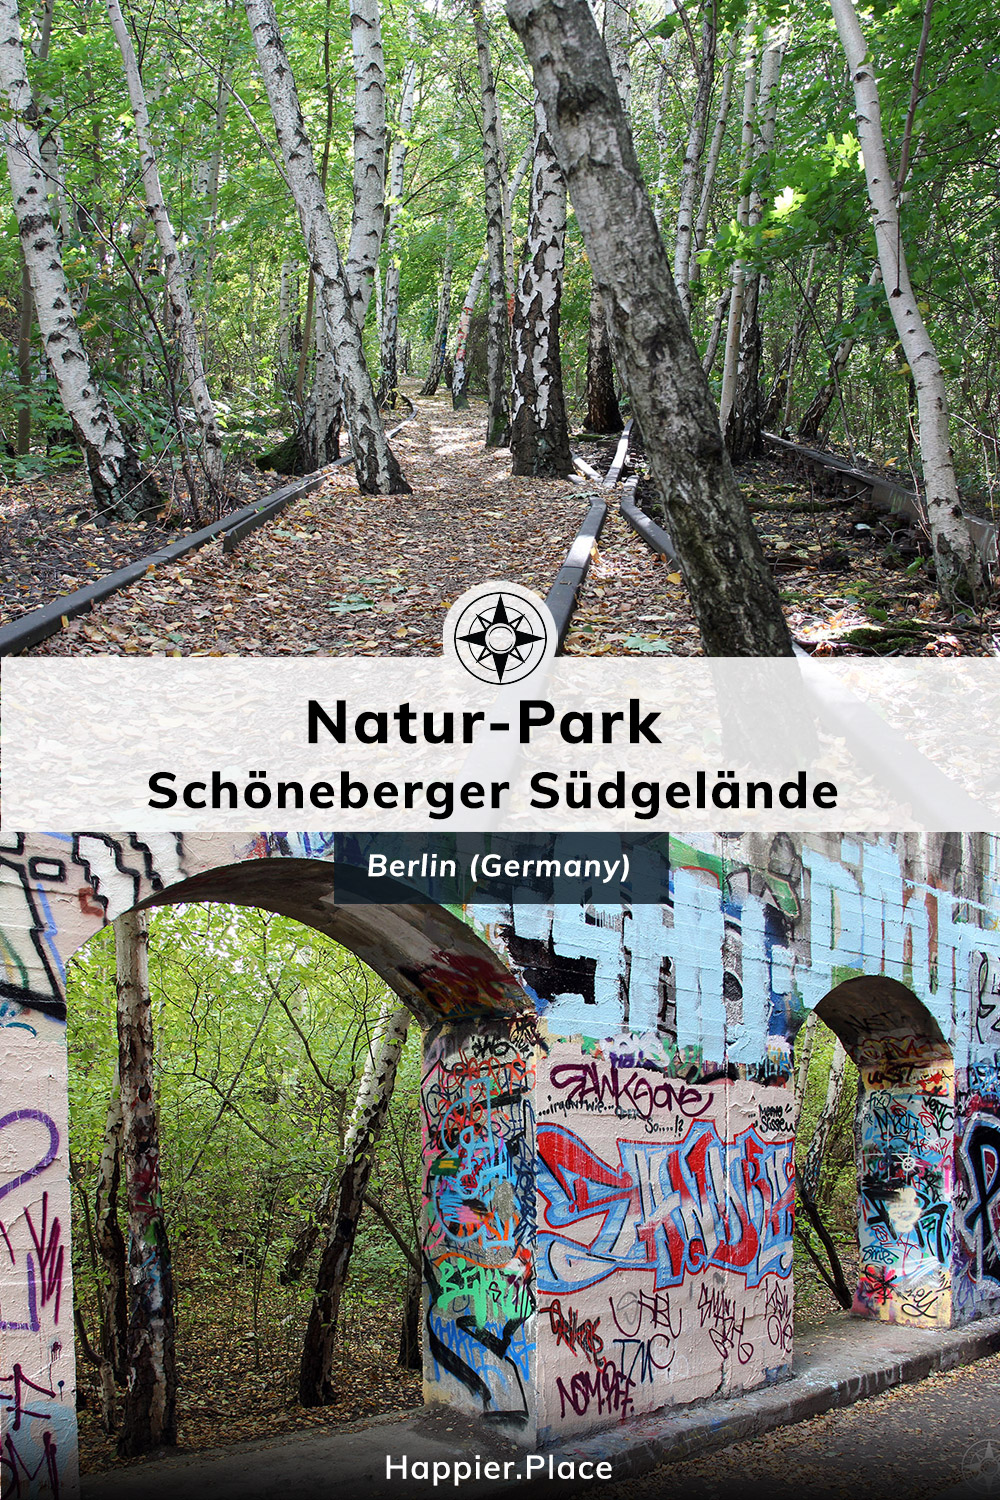 Nature takes over train tracks, graffiti covers walls with view of forest, Berlin Natur-Park Schoeneberger Suedgelaende, Happier Place